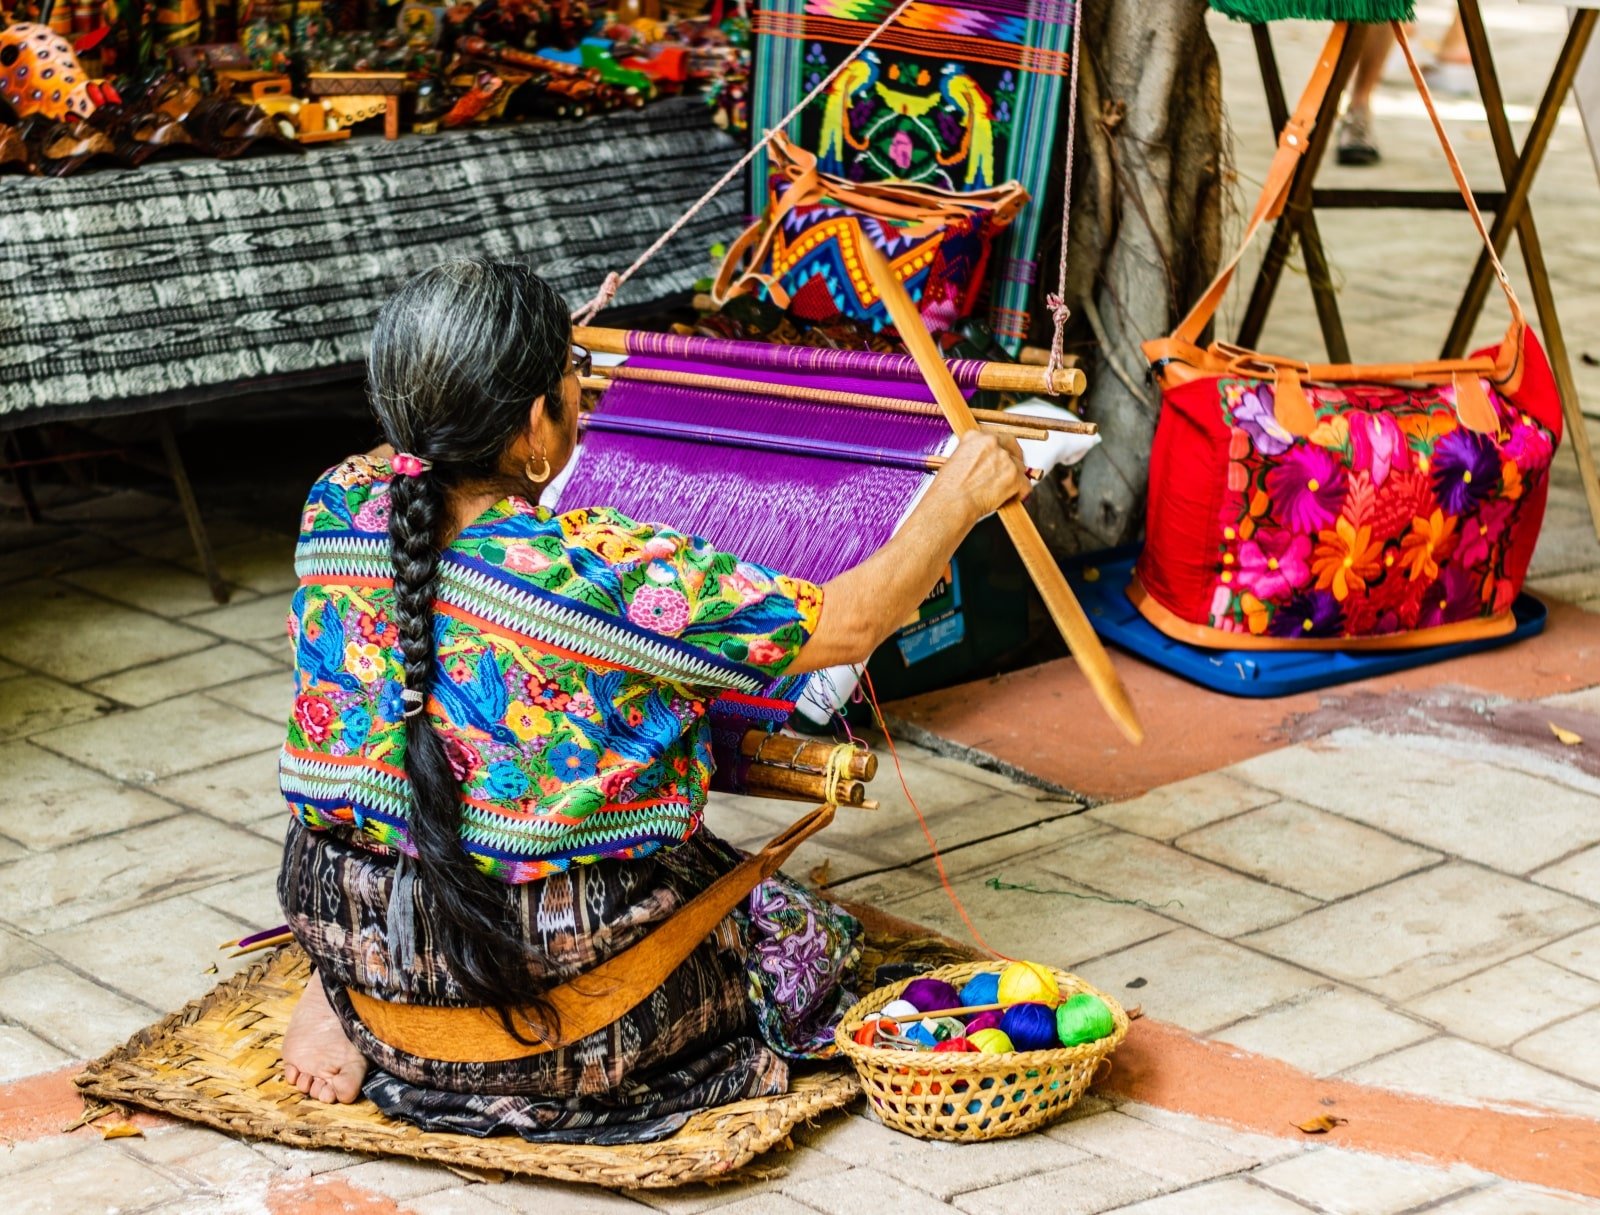 <p><span>Guatemala has many community-based tourism projects focus on preserving traditional arts and crafts. Towns like San Juan La Laguna on Lake Atitlán are known for their textile cooperatives. Here, you can learn about the art of weaving from local artisans, understanding the significance of their traditional techniques and patterns.</span></p> <p><span>Participating in these workshops provides you with a unique souvenir and supports the artisans and their craft. These cooperatives often use natural dyes and sustainable practices, making your participation a support for eco-friendly initiatives.</span></p> <p><b>Insider’s Tip: </b><span>Engage with the artisans, ask questions about their craft, and purchase directly from them to ensure they receive fair compensation.</span></p>